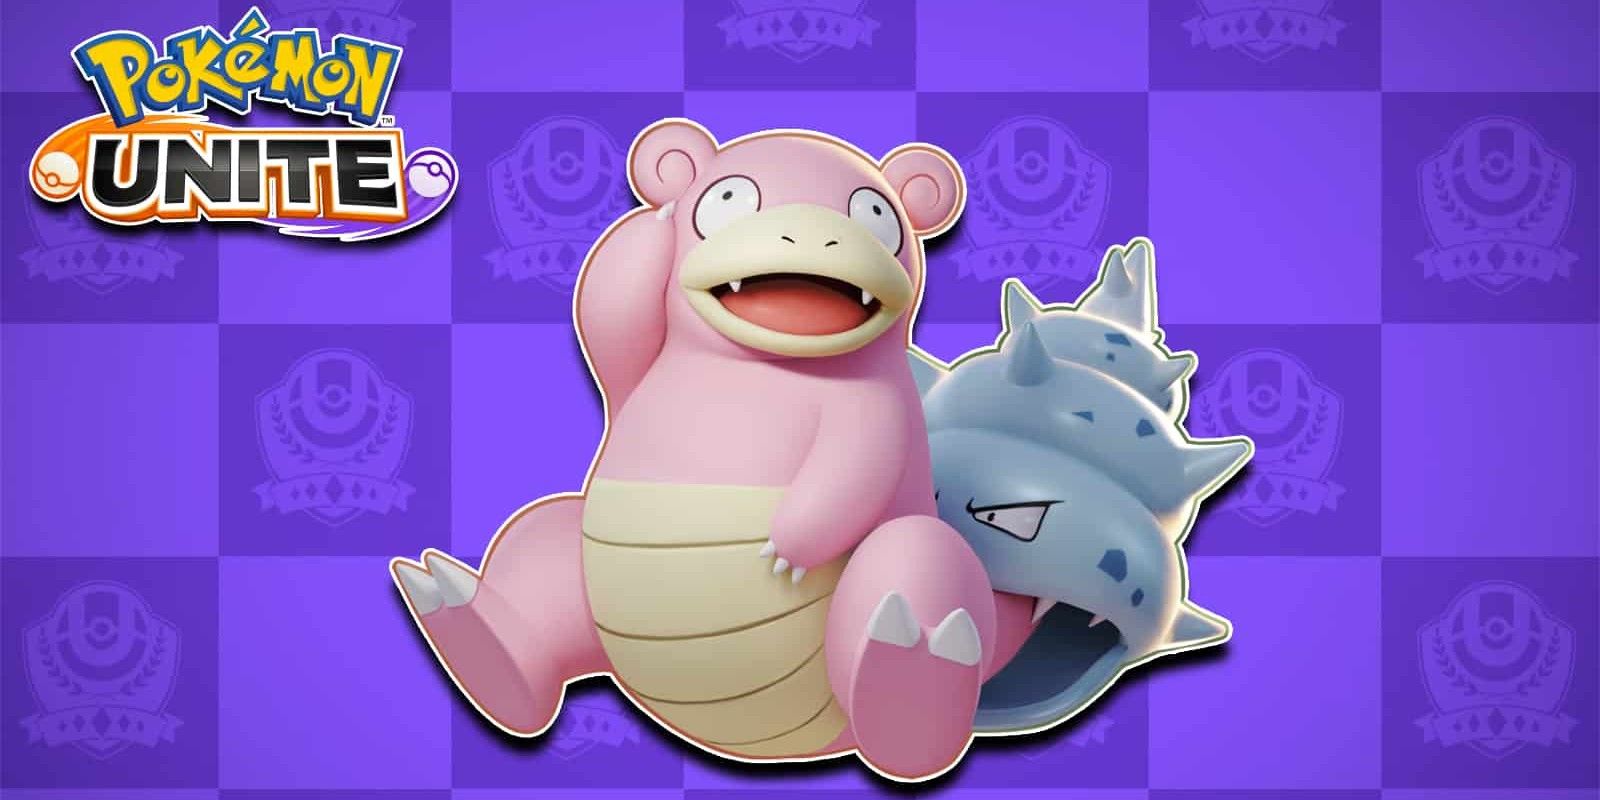 Slowbro in the Pokemon UNITE preview for the game